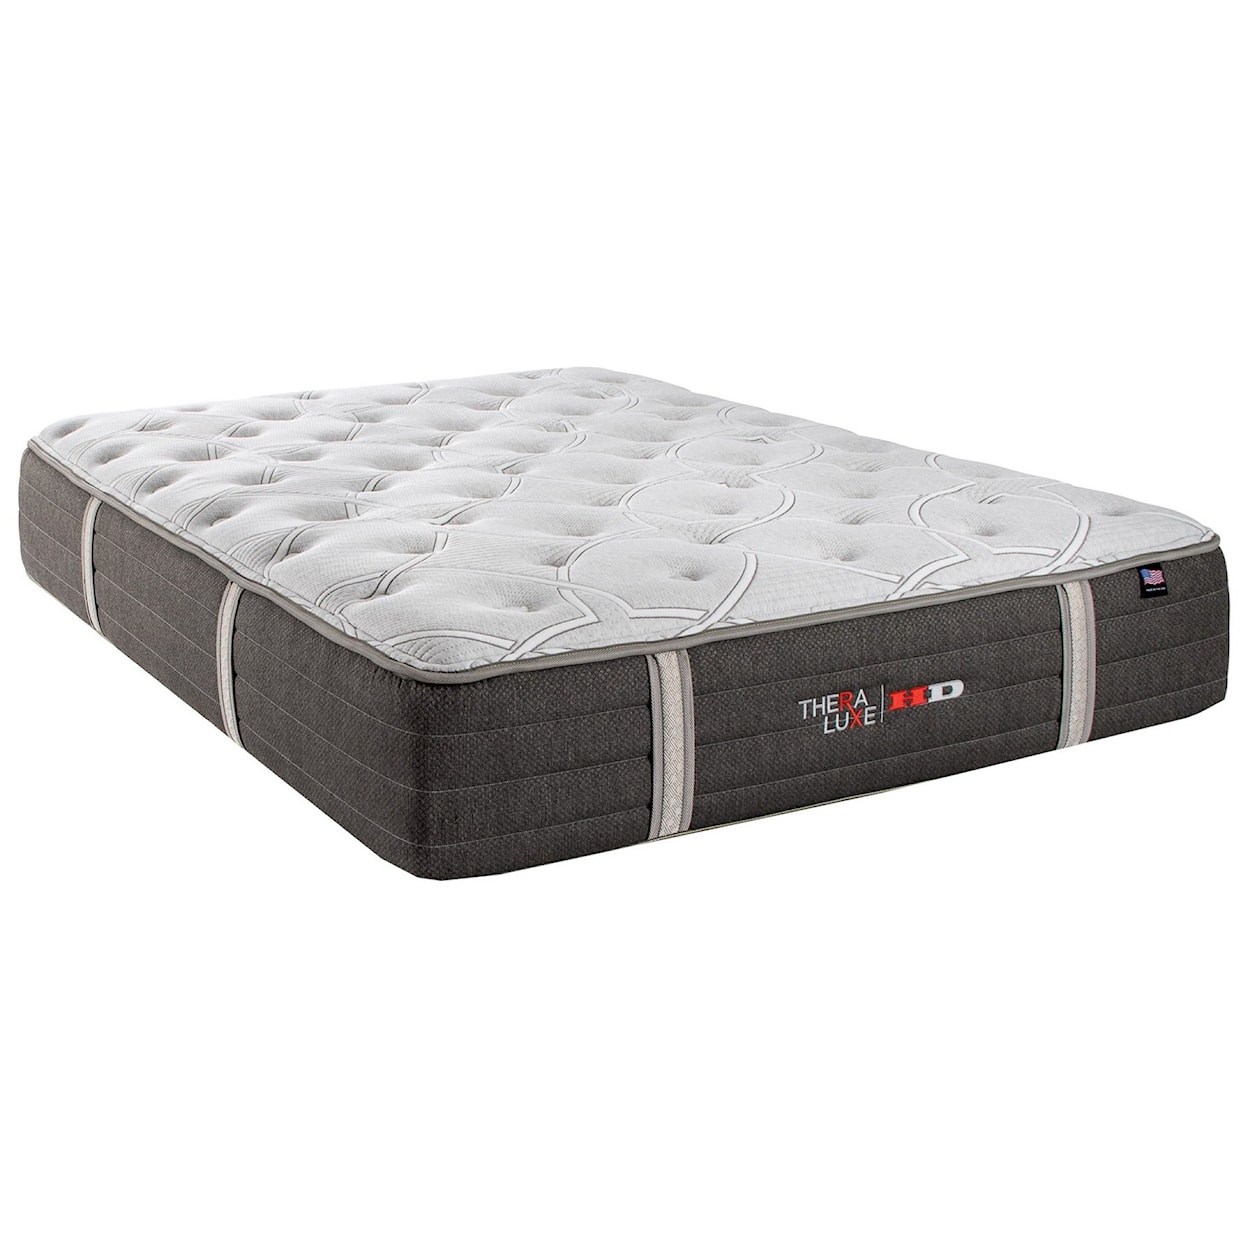 Therapedic Theraluxe Sequoia Full Plush Pocketed Coil Mattress